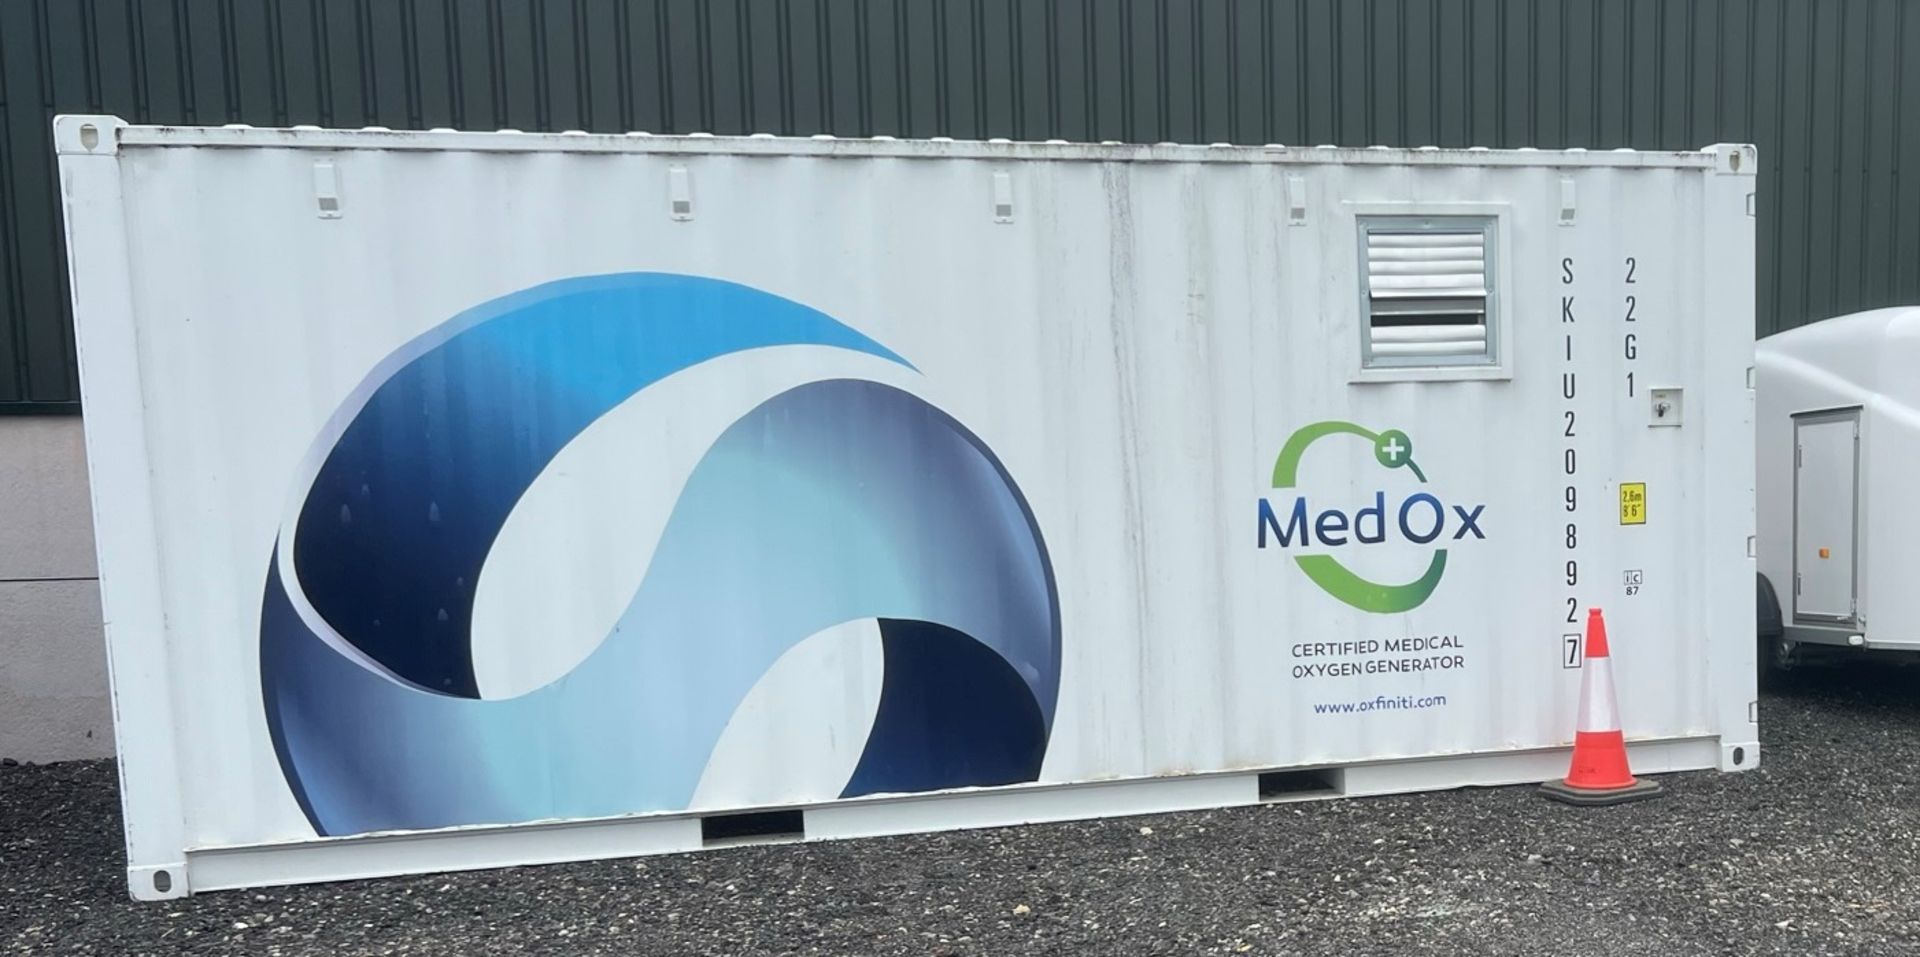 MedOx mobile containerised medical oxygen generator - 95% purity - see full description for details